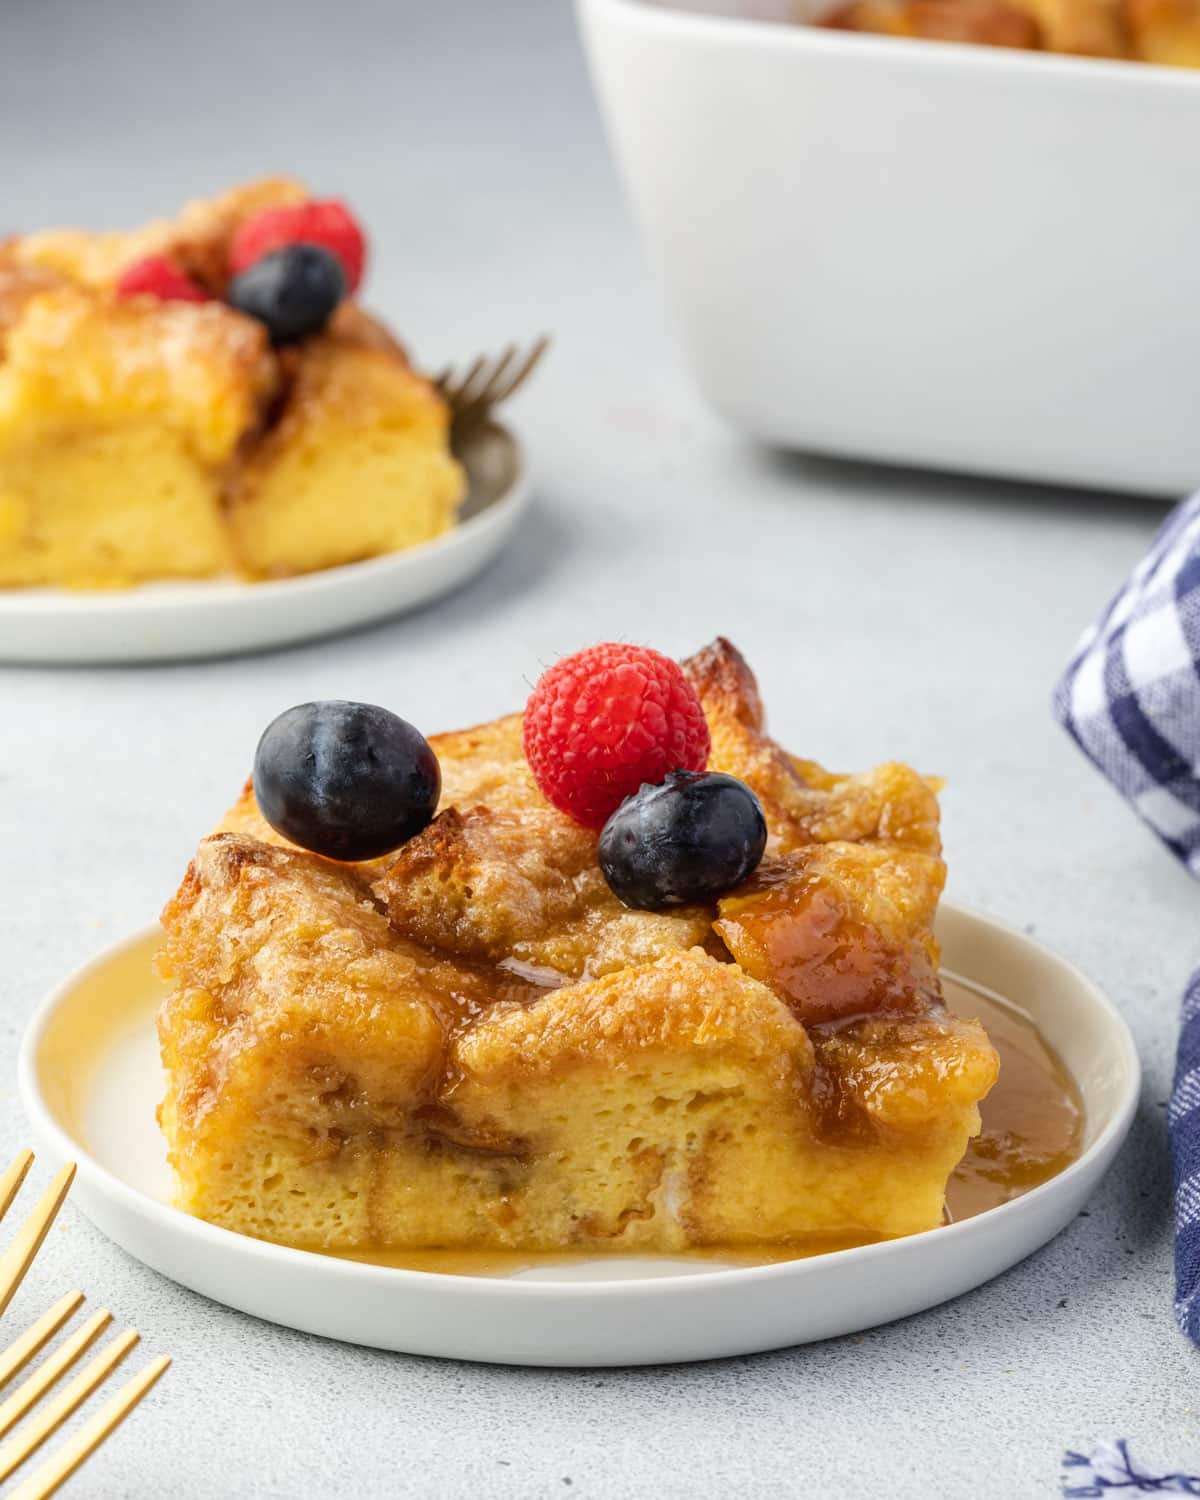 Square of casserole on a plate with berries on top.